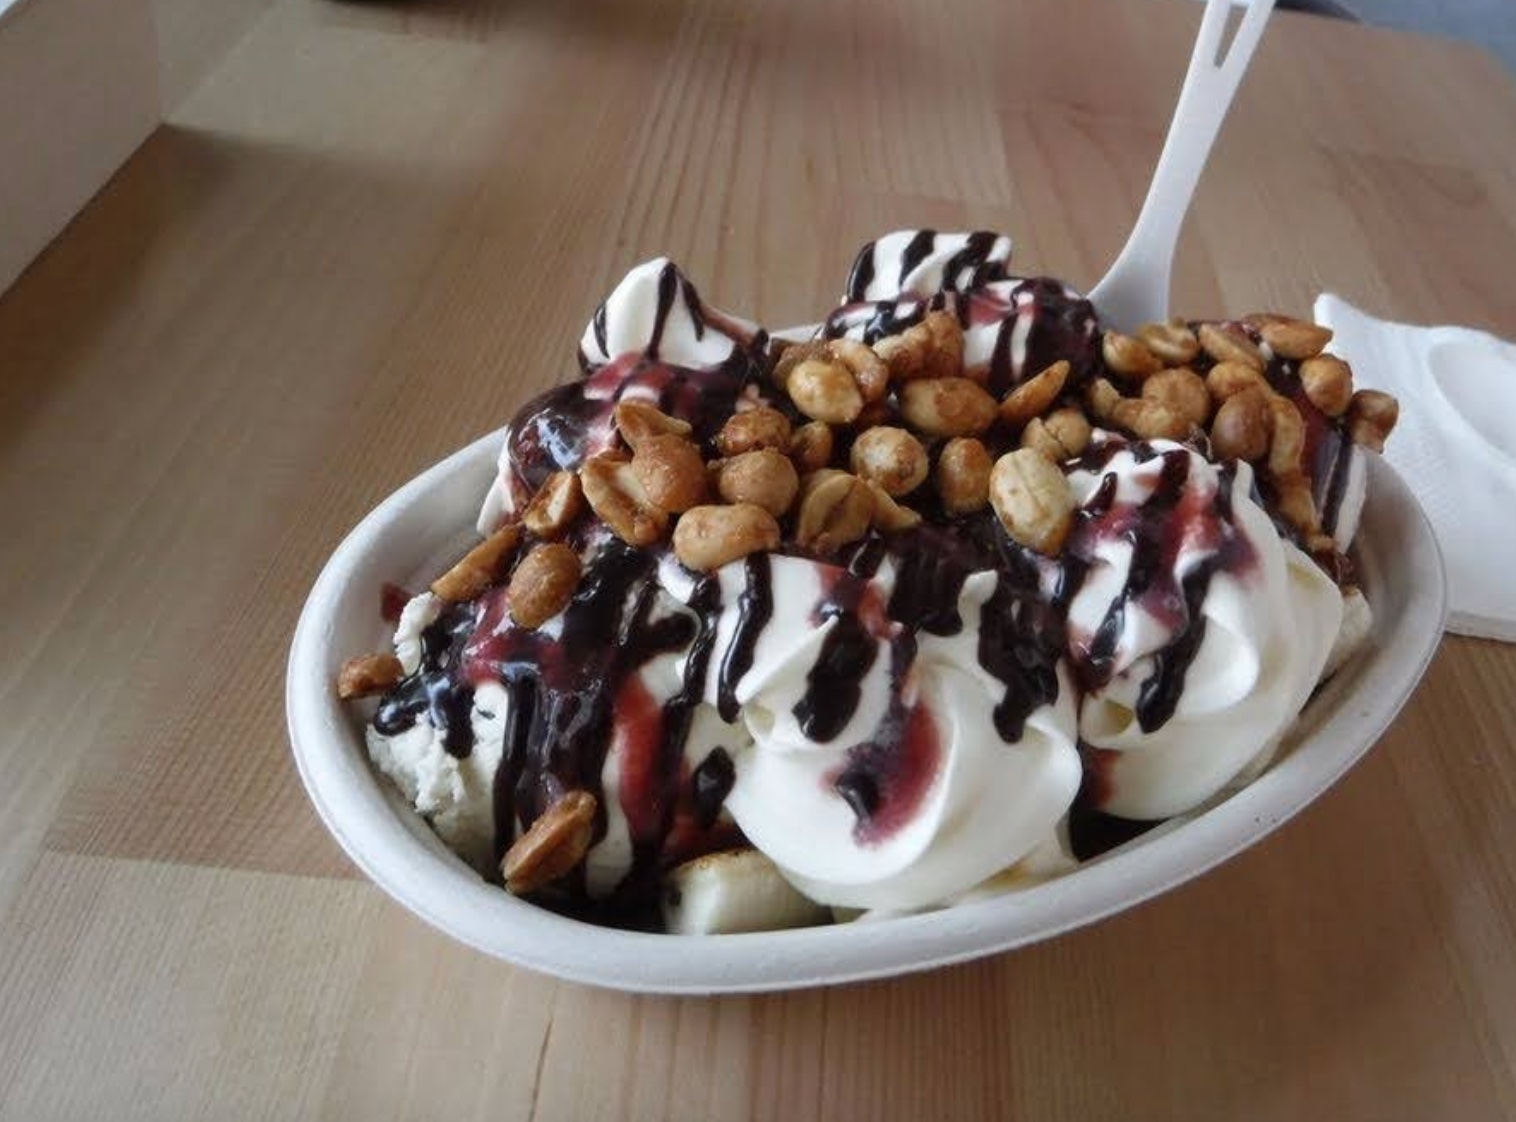 A banana split with chocolate sauce and nuts on top